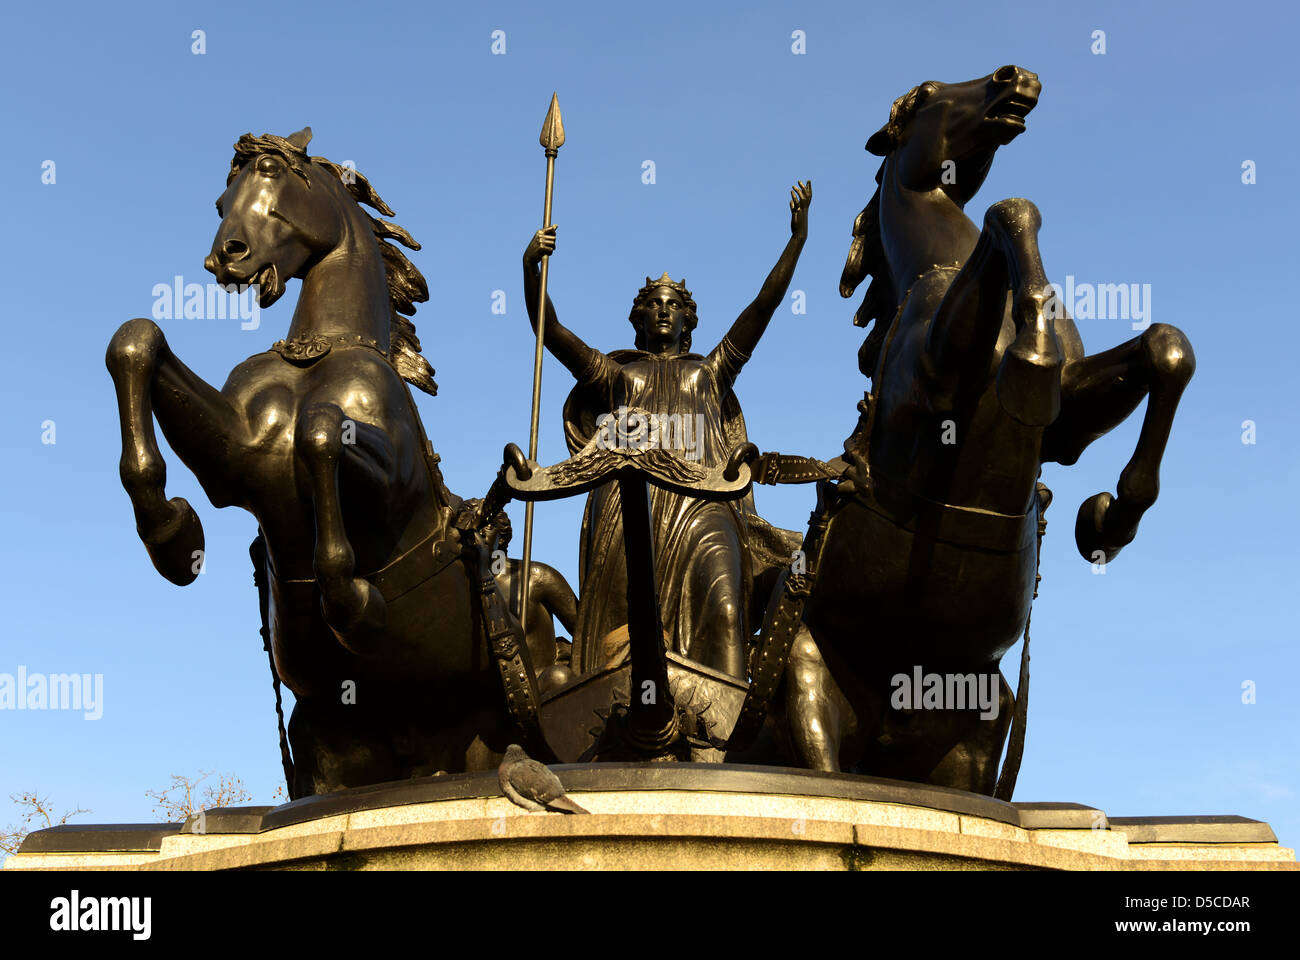 Statue of Boudicia or Boudica outside The Houses of Parliament in London England UK Stock Photo